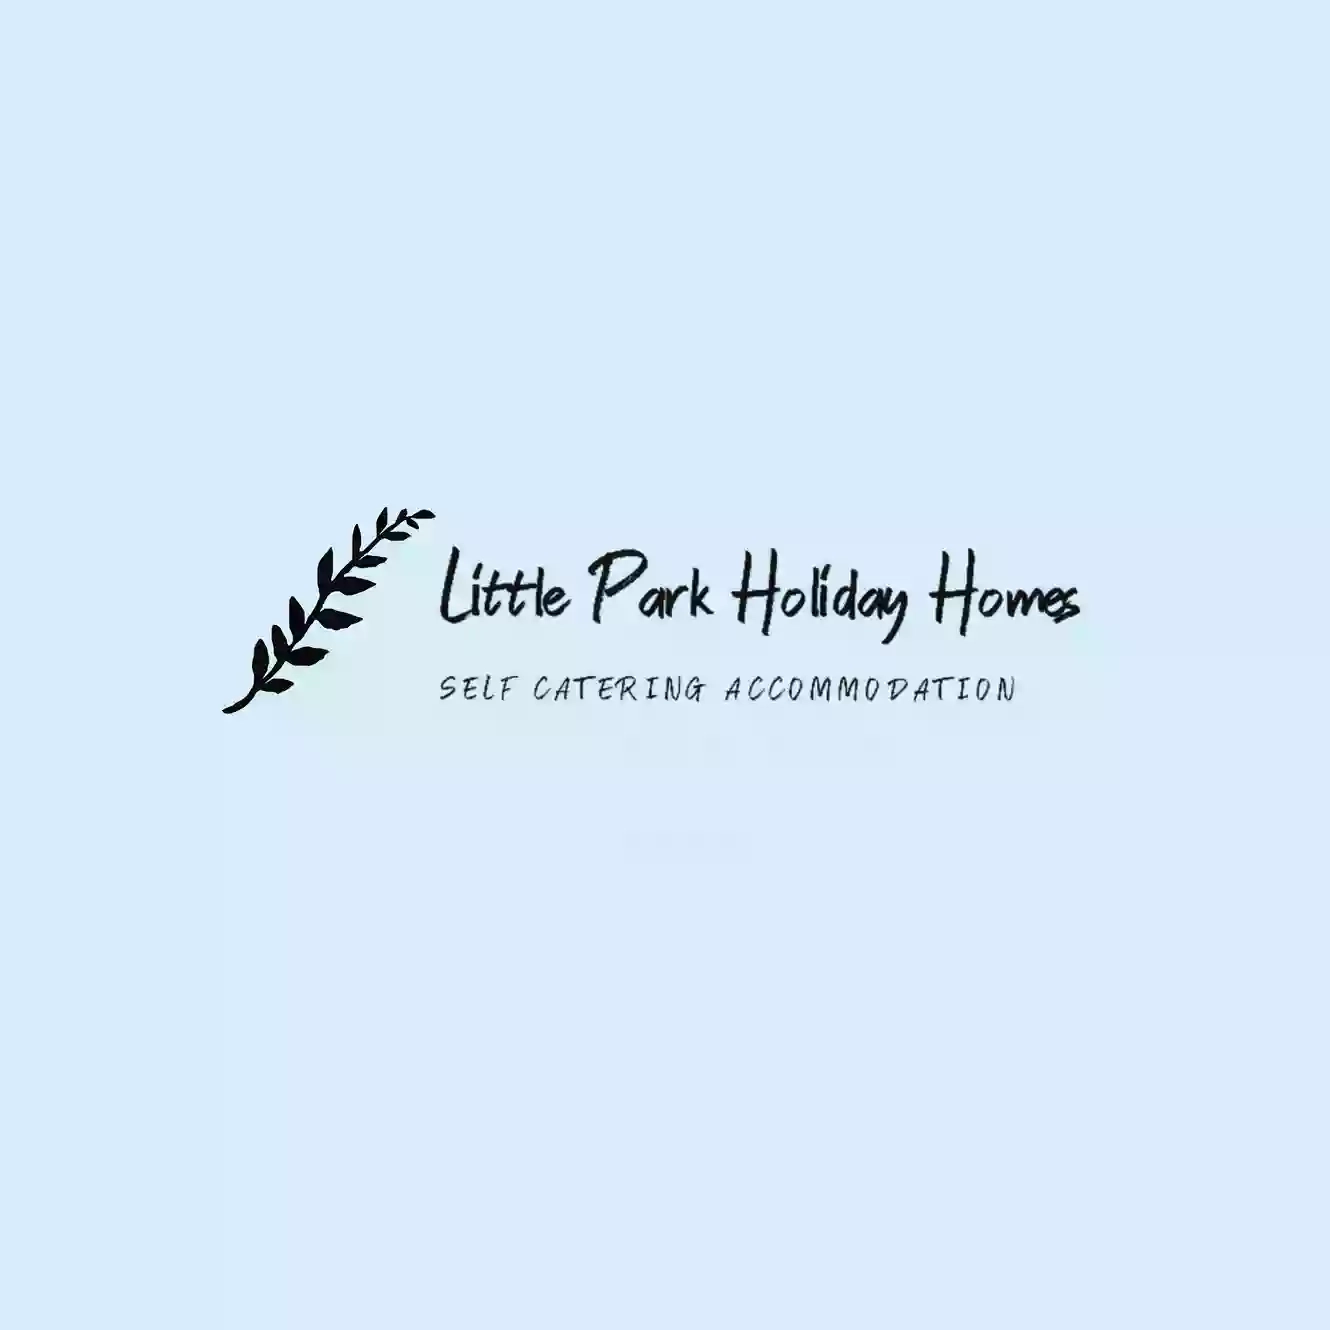 Little Park Holiday Homes